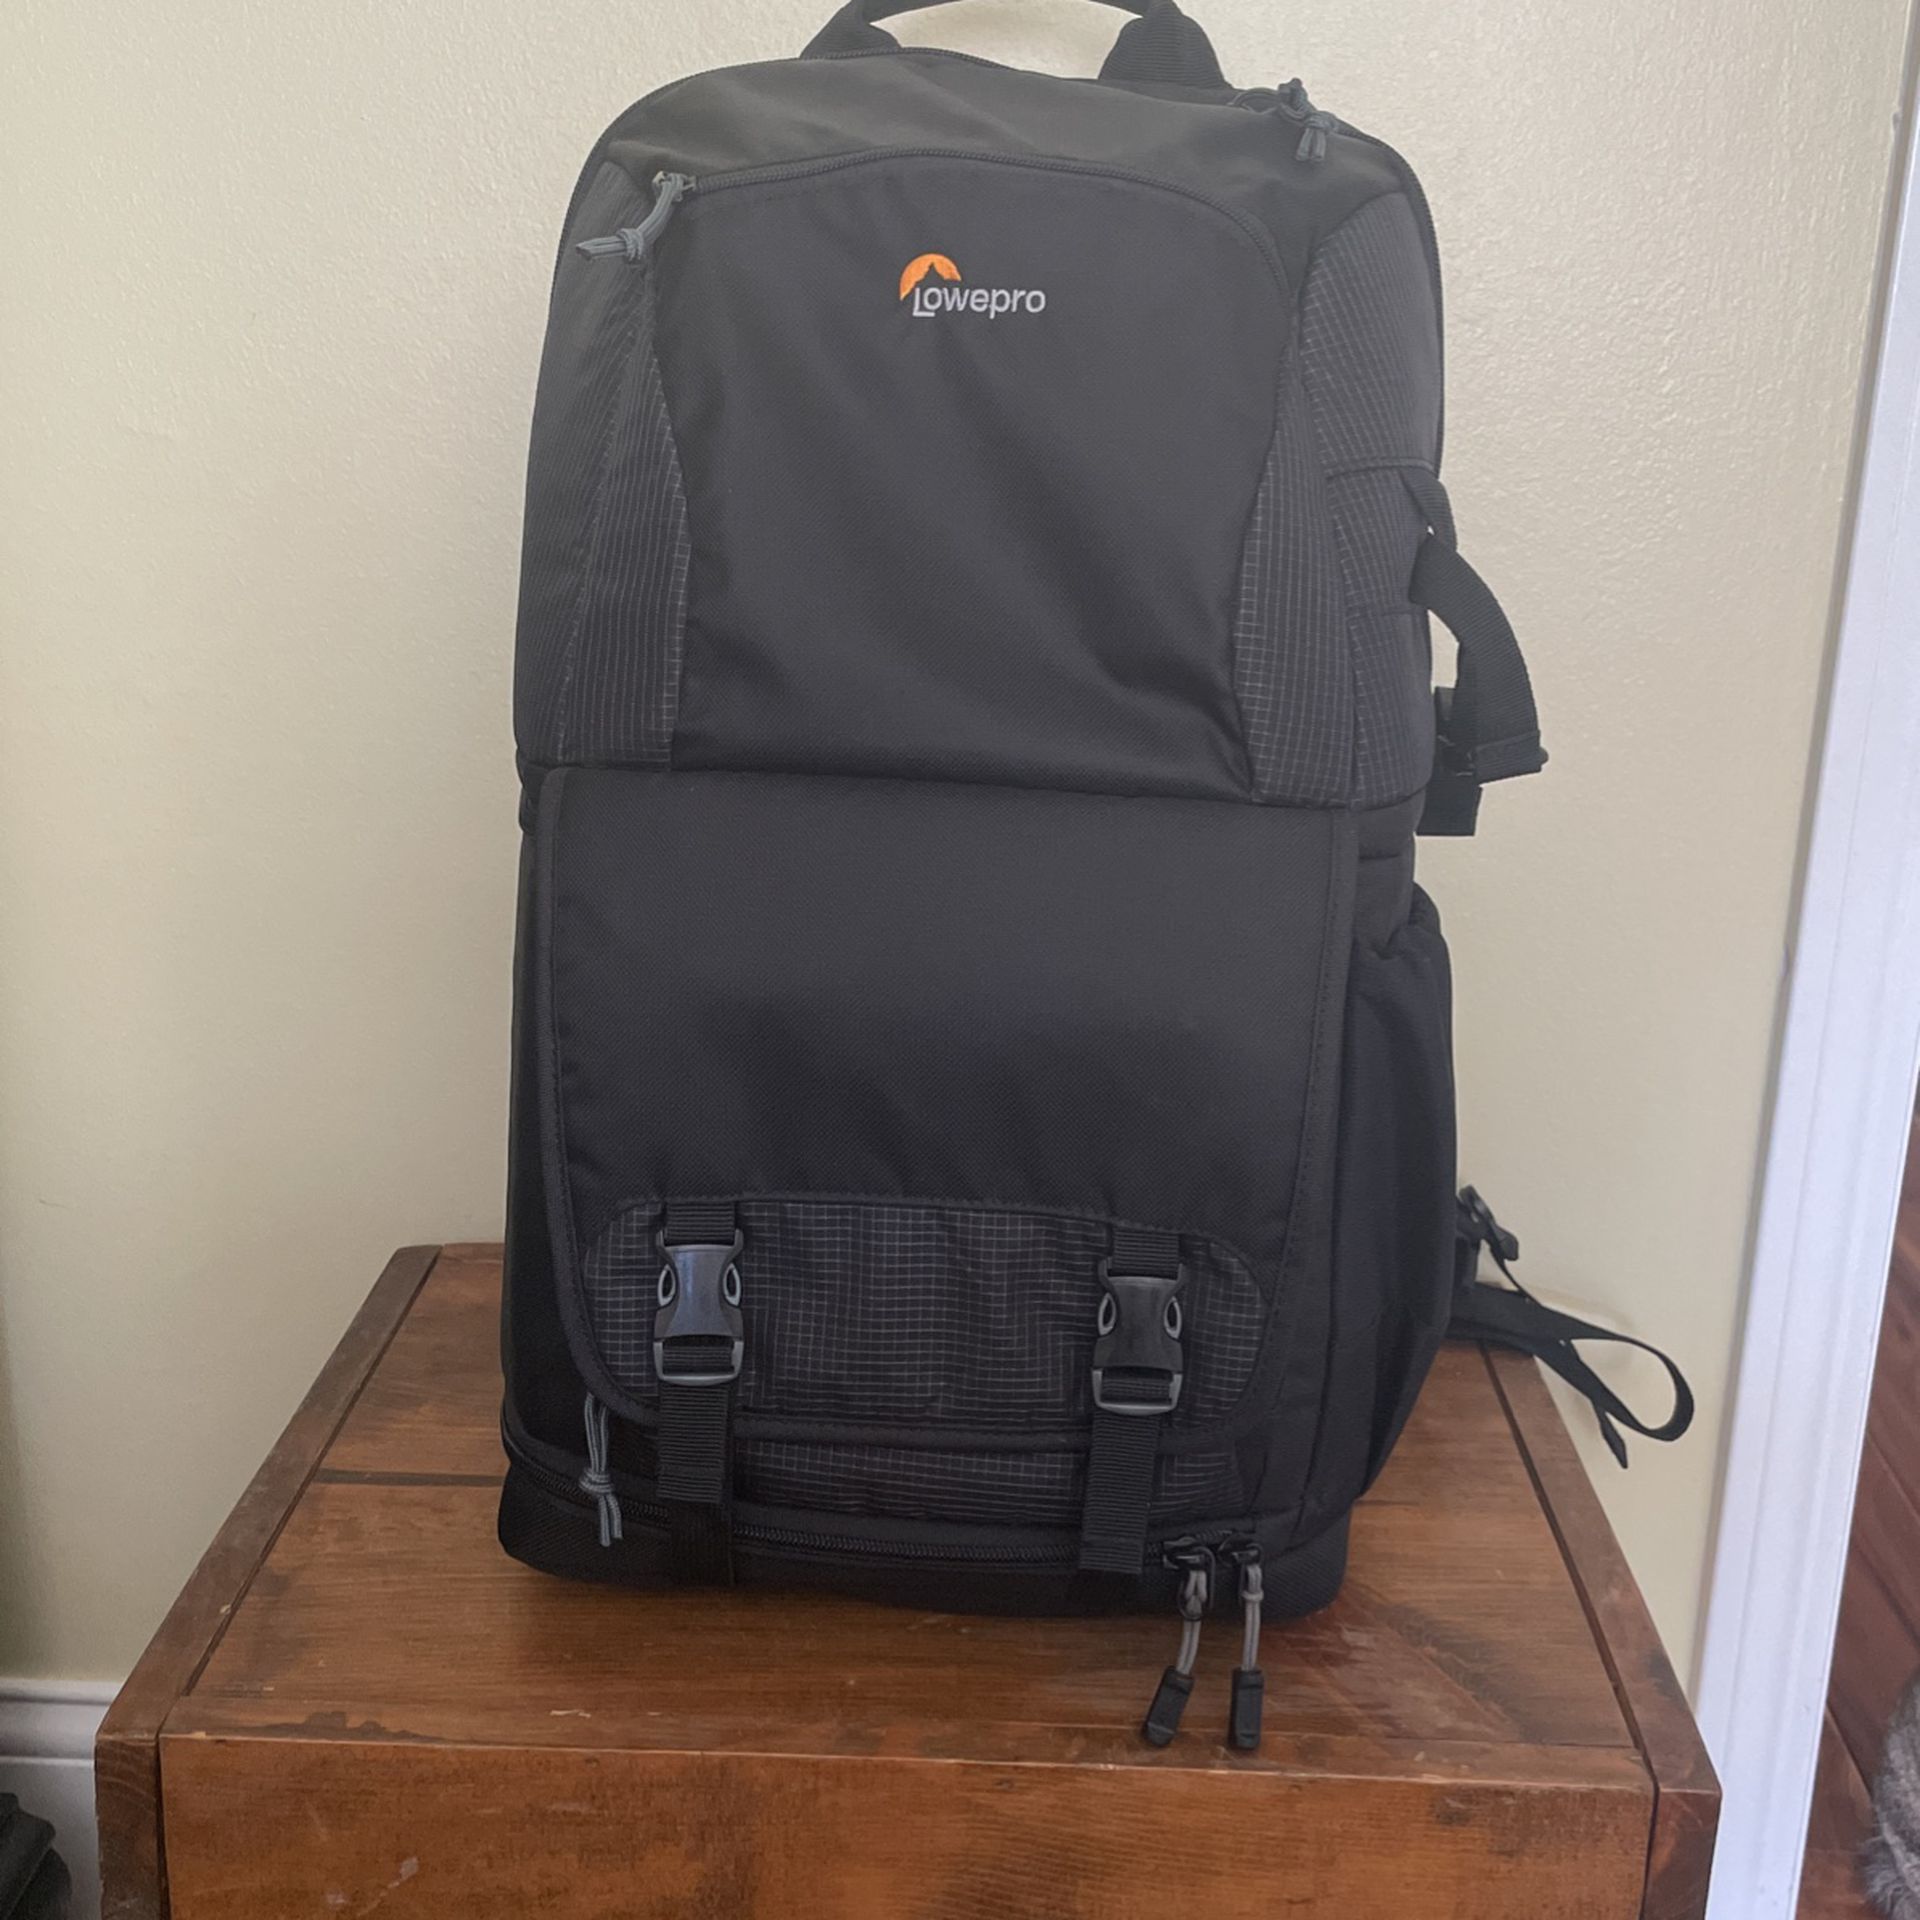 Lowepro Fastpack BP 250 AW II - A Travel-Ready Backpack for DSLR and 15" Laptop and Tablet